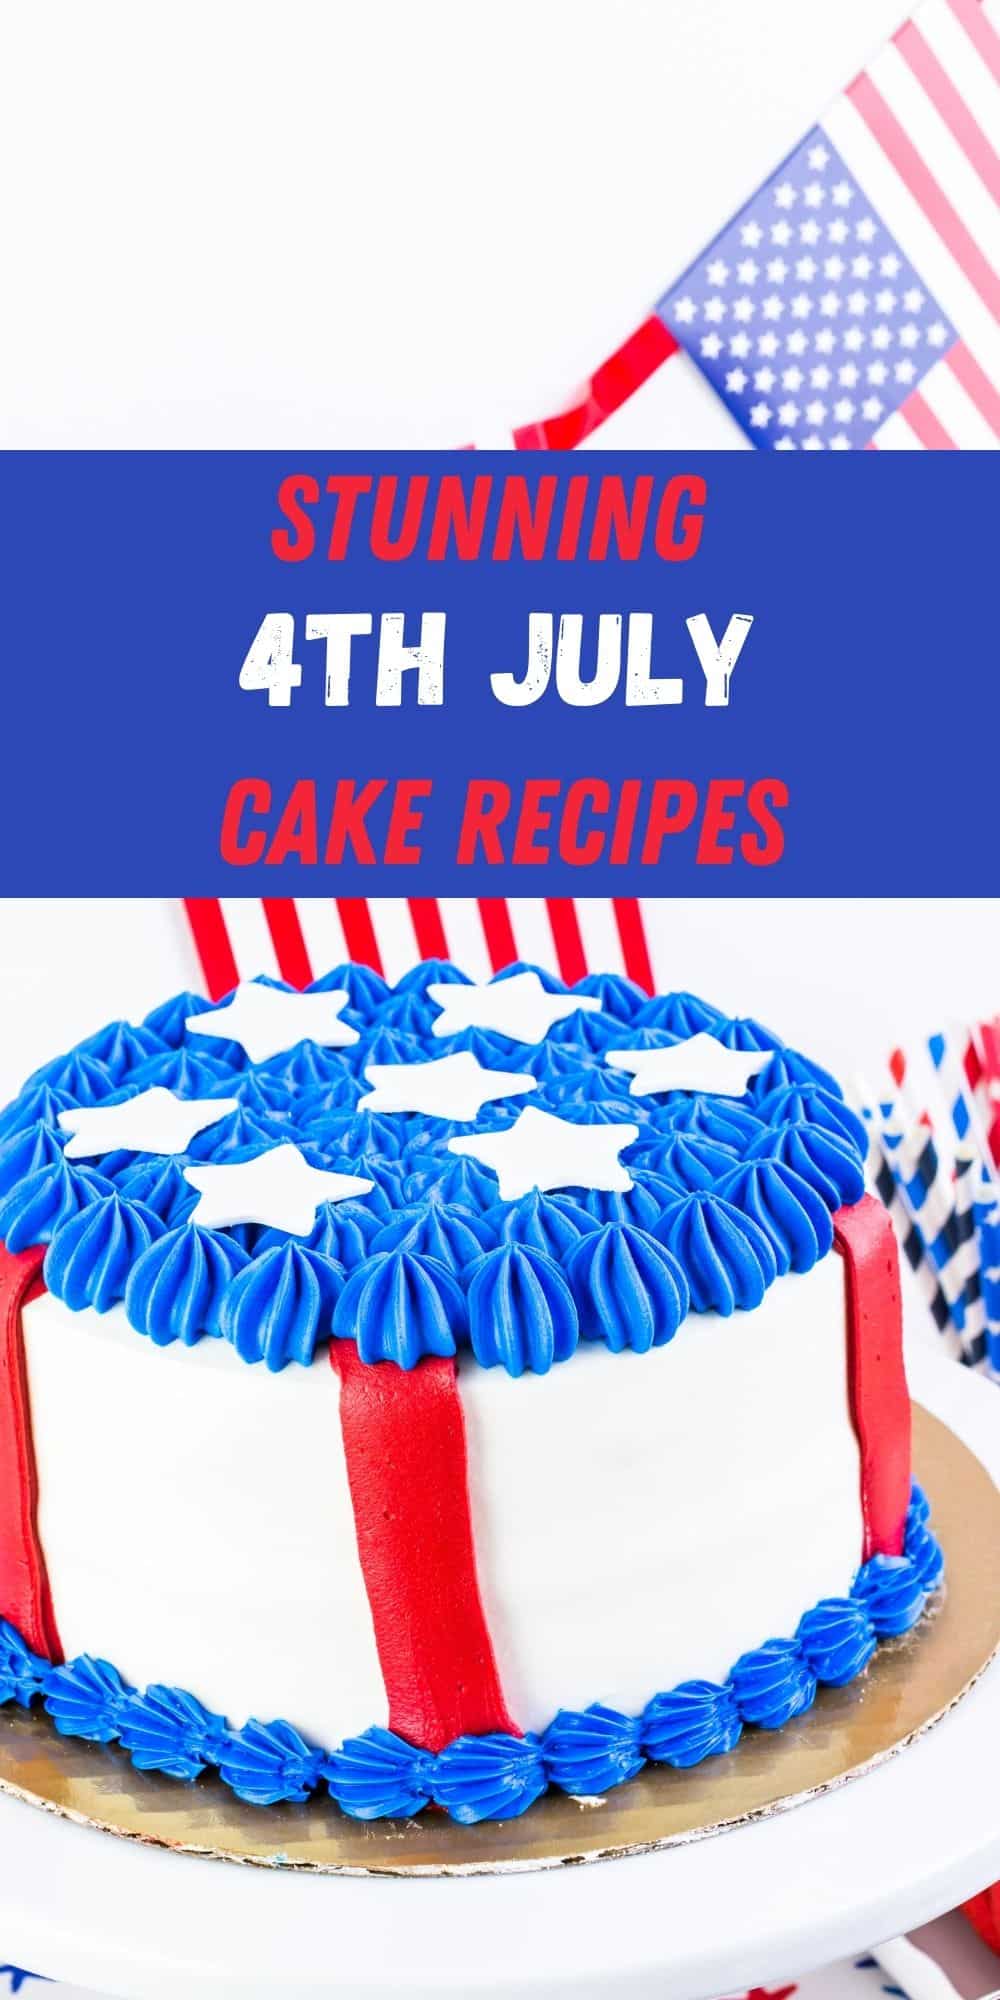 Stunning 4th of july cake recipes